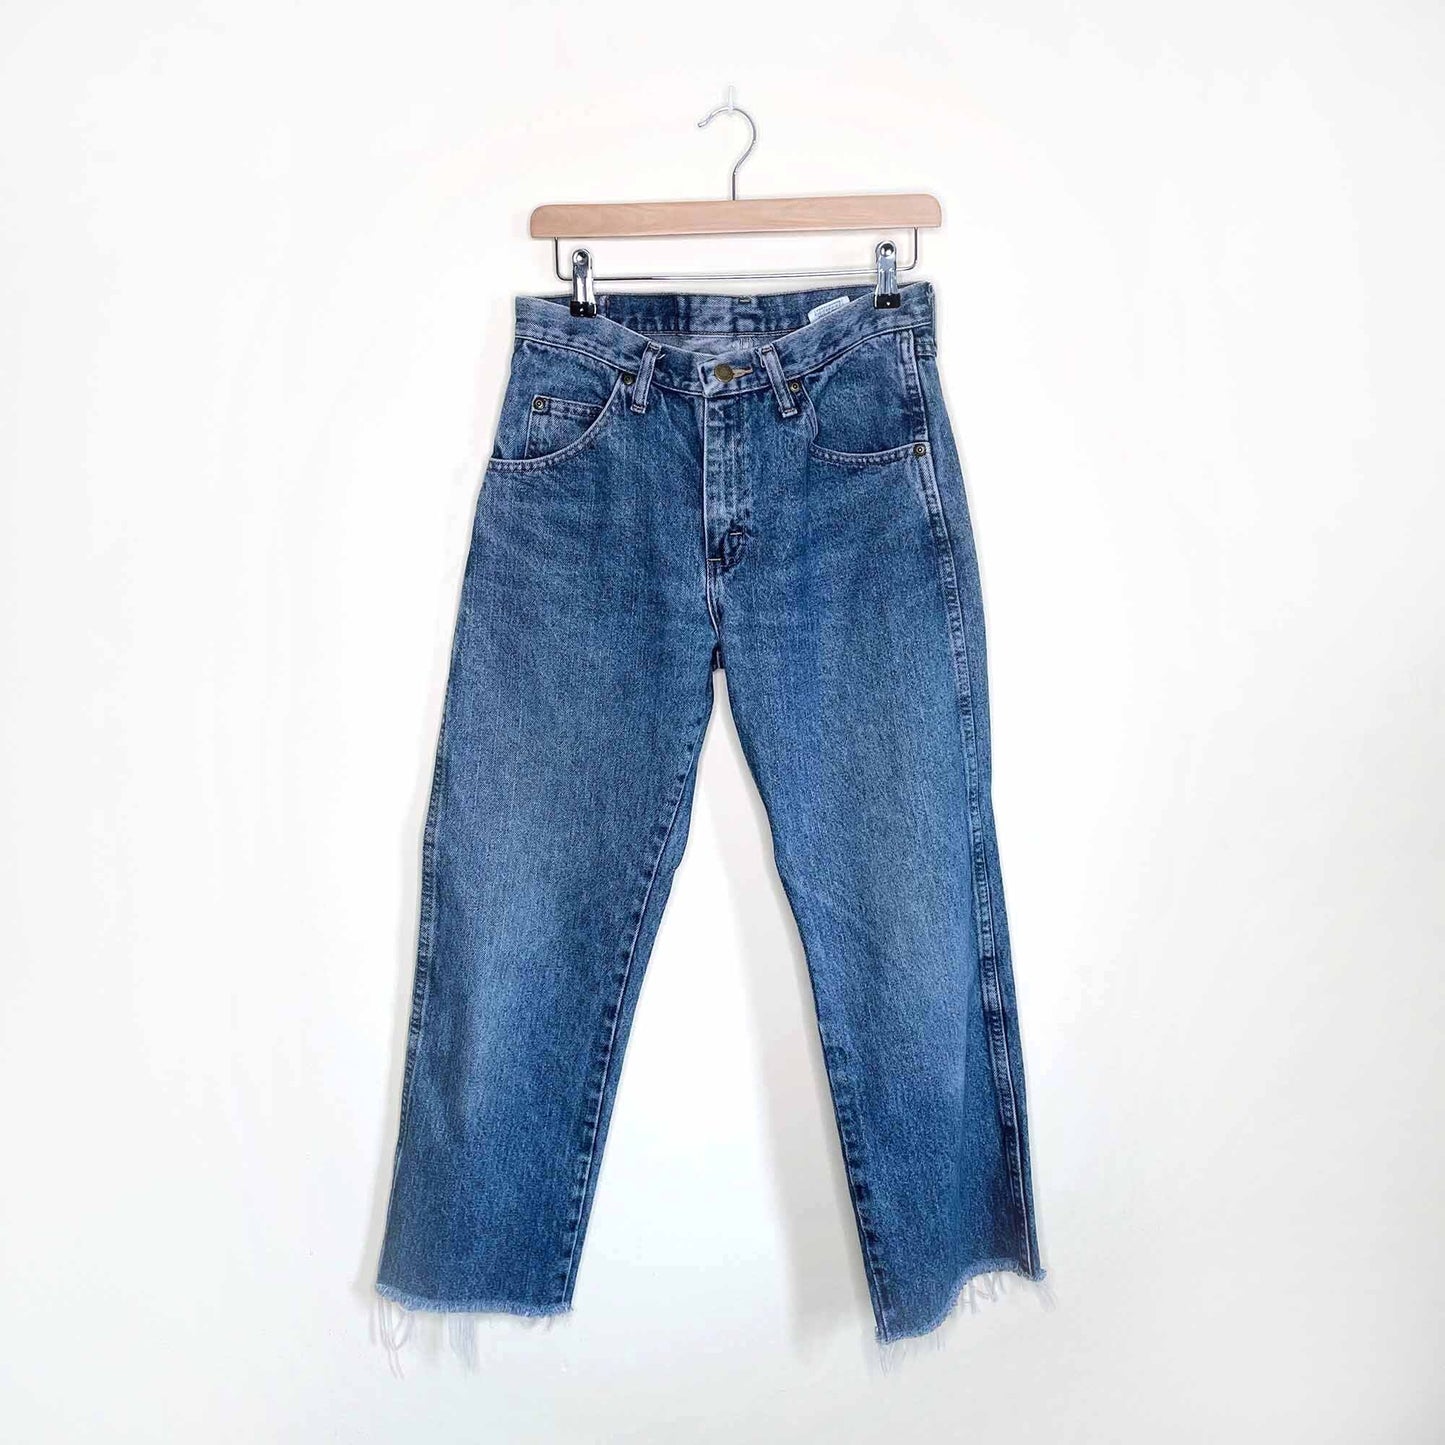 Wrangler high rise cut-off cropped mom jeans - size 30